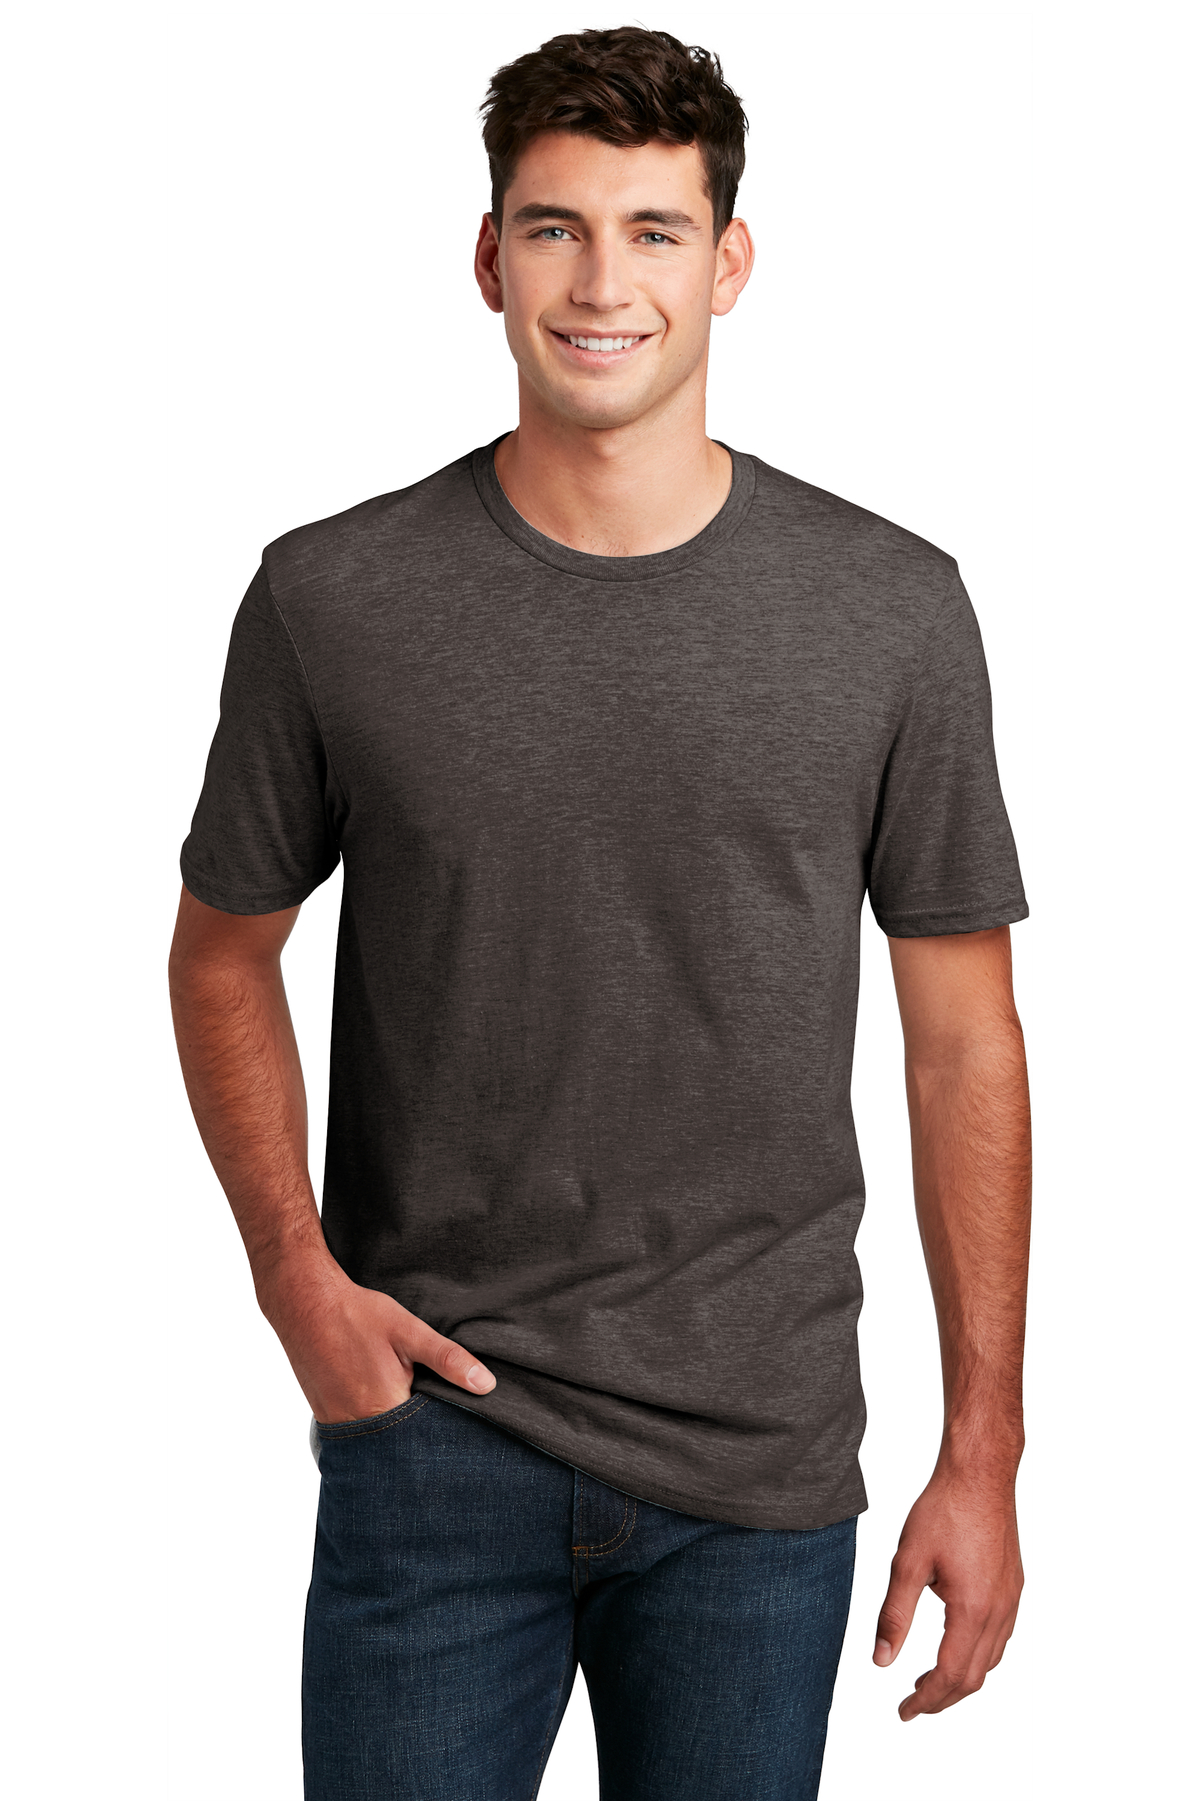 District Embroidered Men's Perfect Blend Tee | T-Shirts - Queensboro